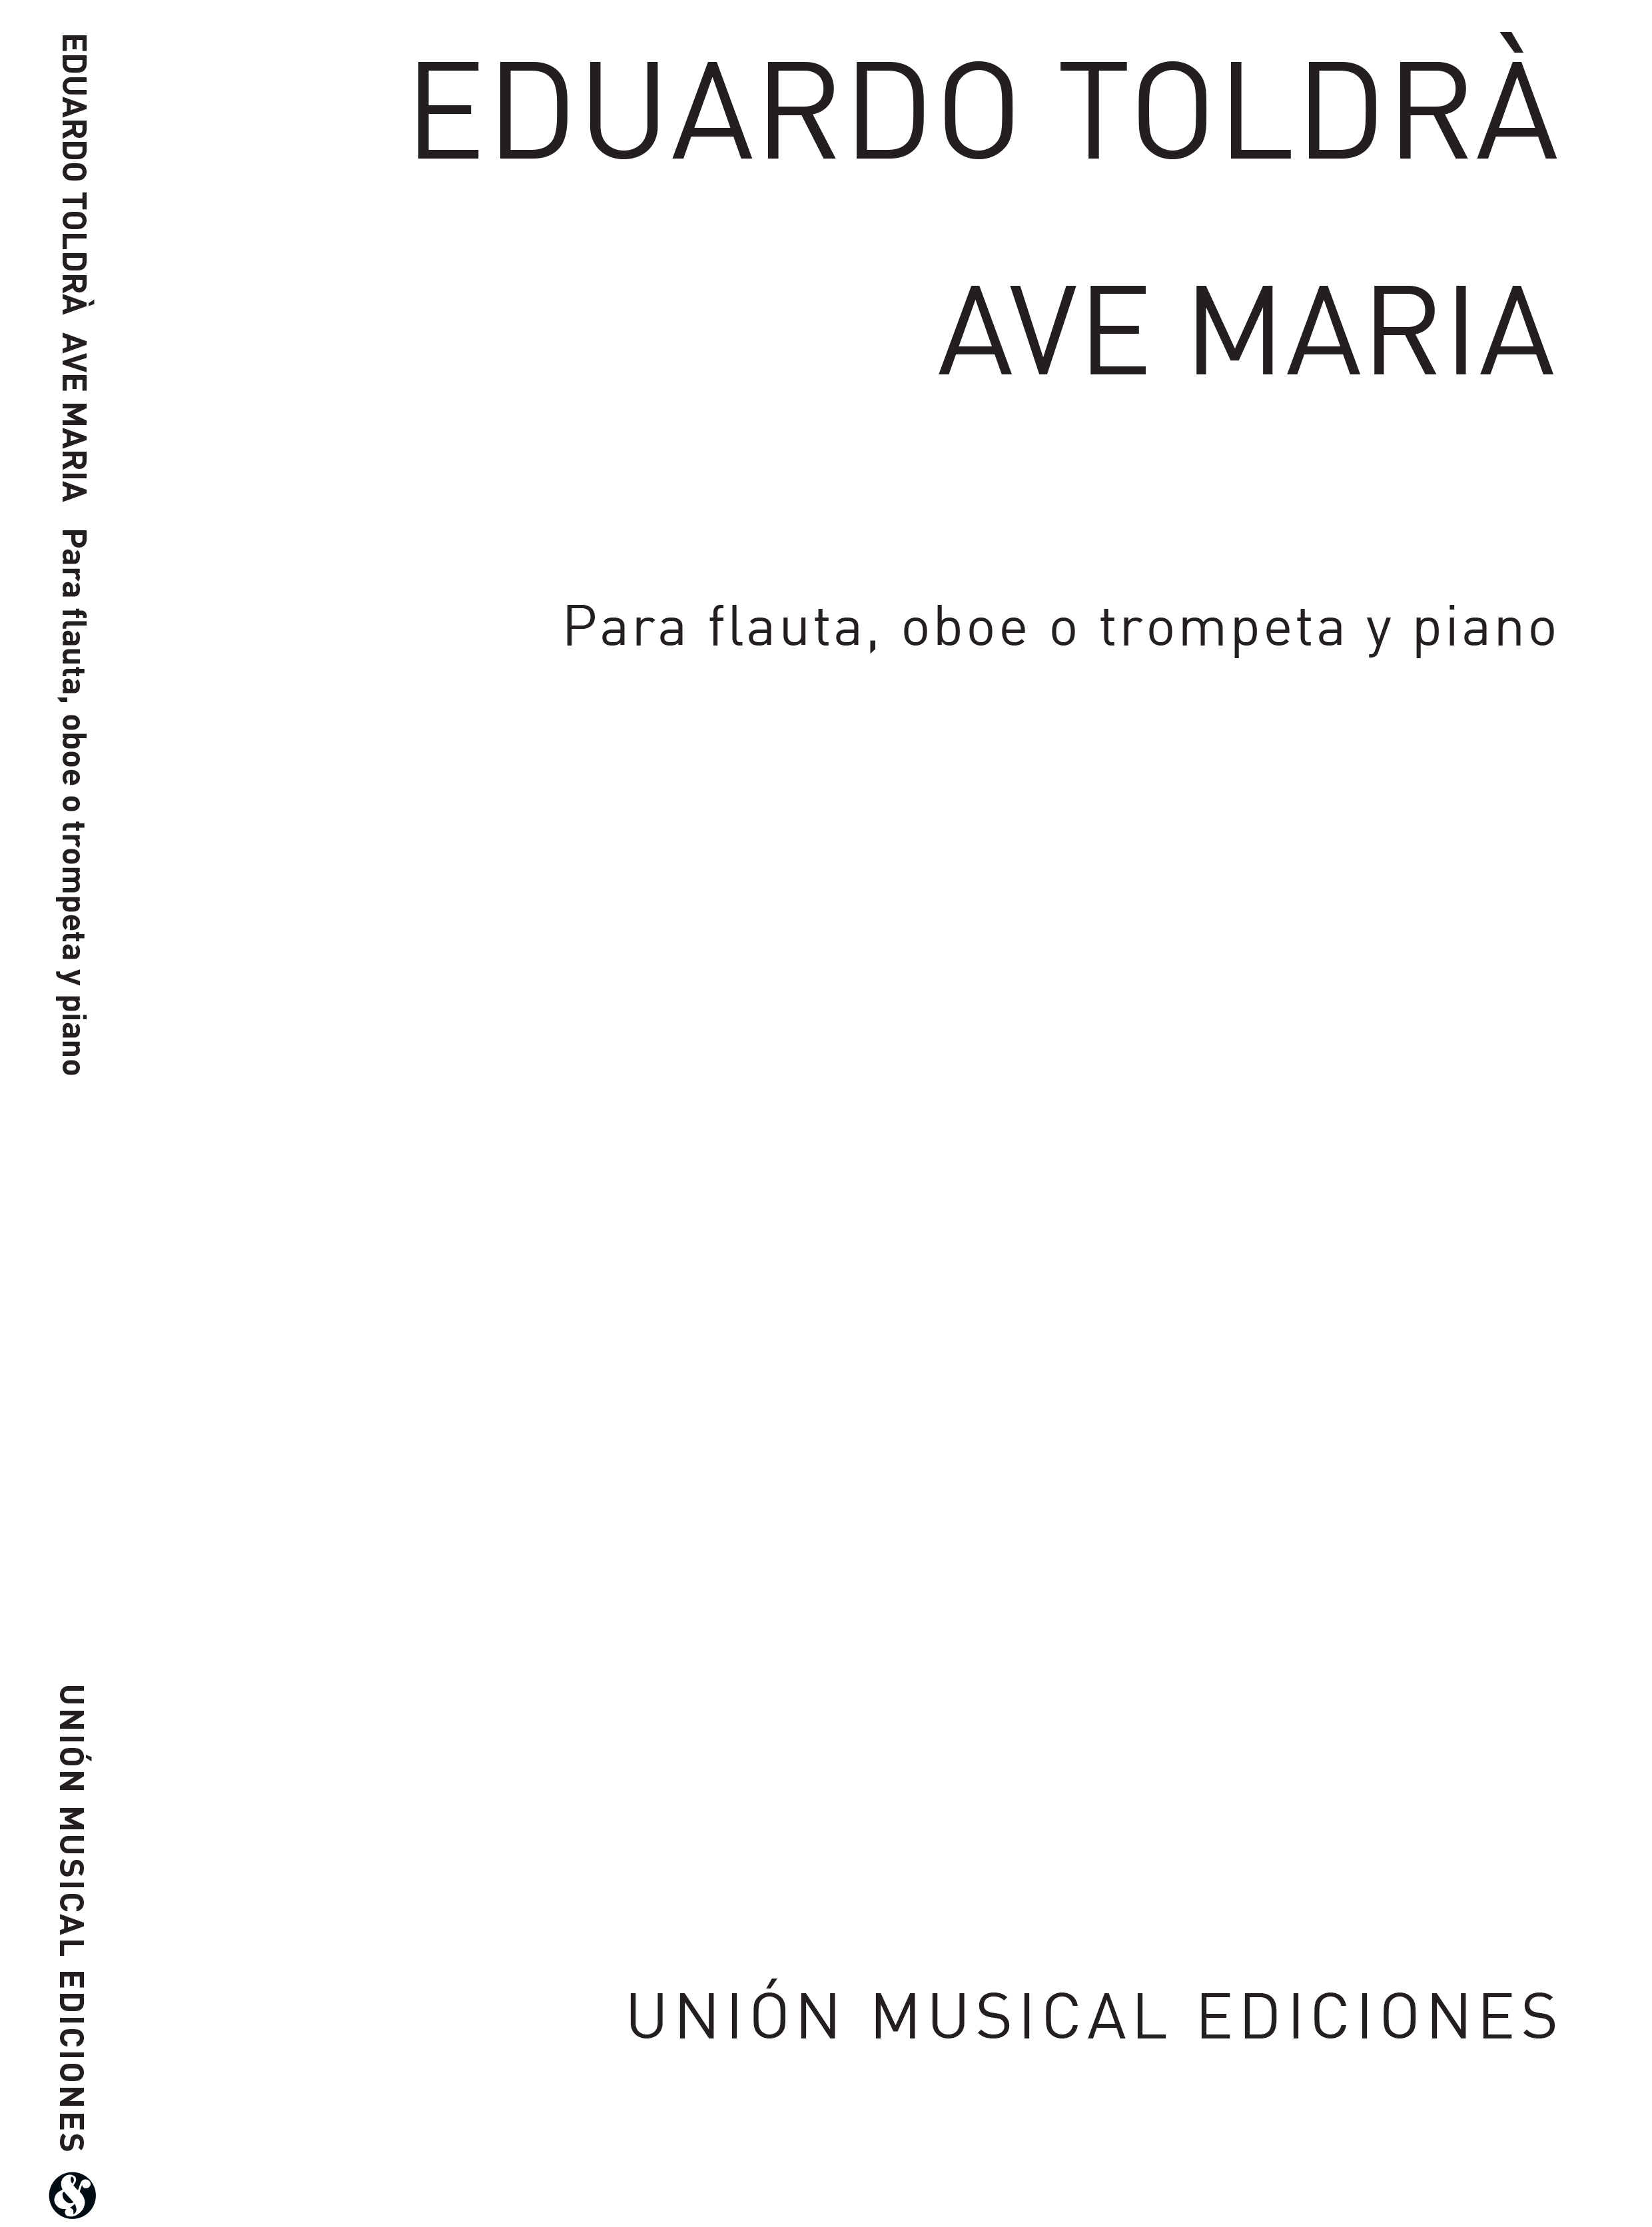 Toldra: Ave Maria (Amaz) for Trumpet and Piano